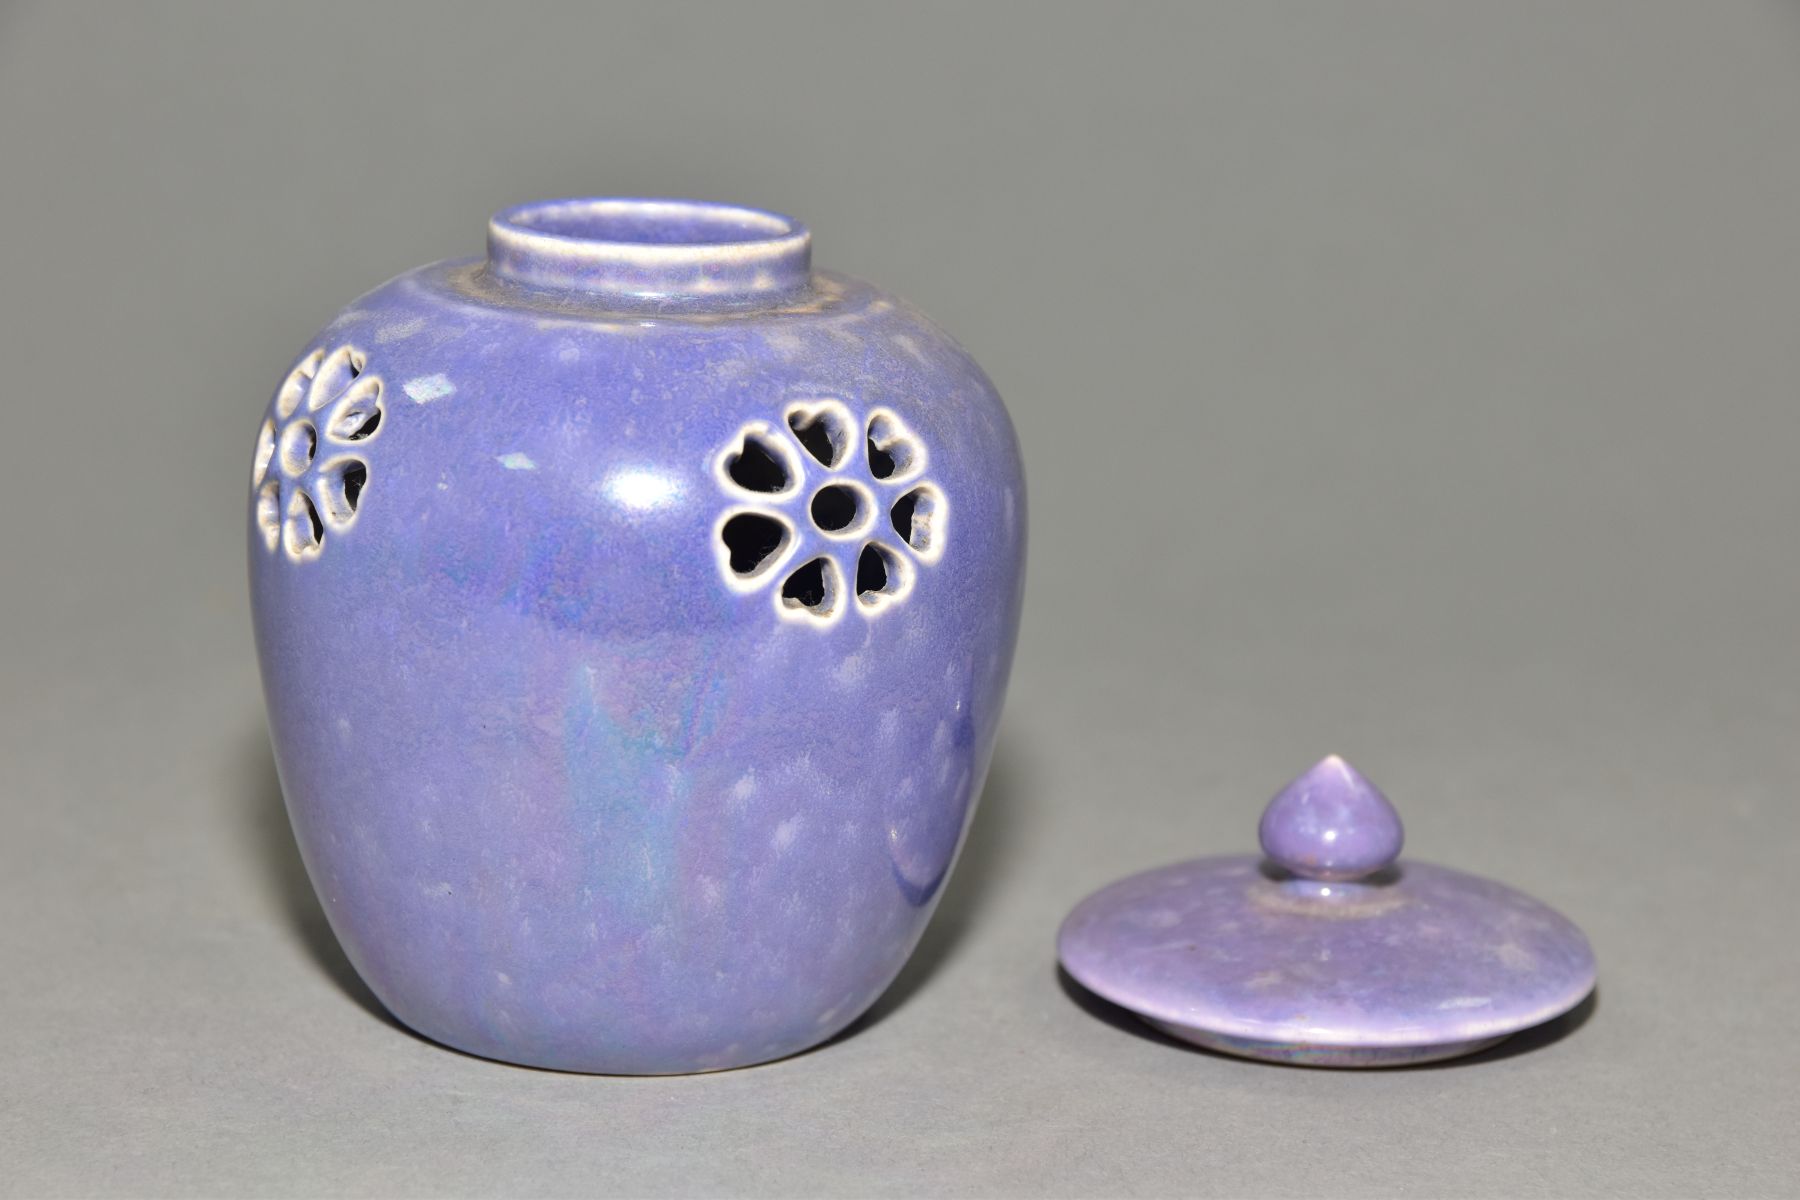 RUSKIN POTTERY, a lavender lustre reticulated ginger/pot pourri jar with cover, pierced flowers with - Image 6 of 7